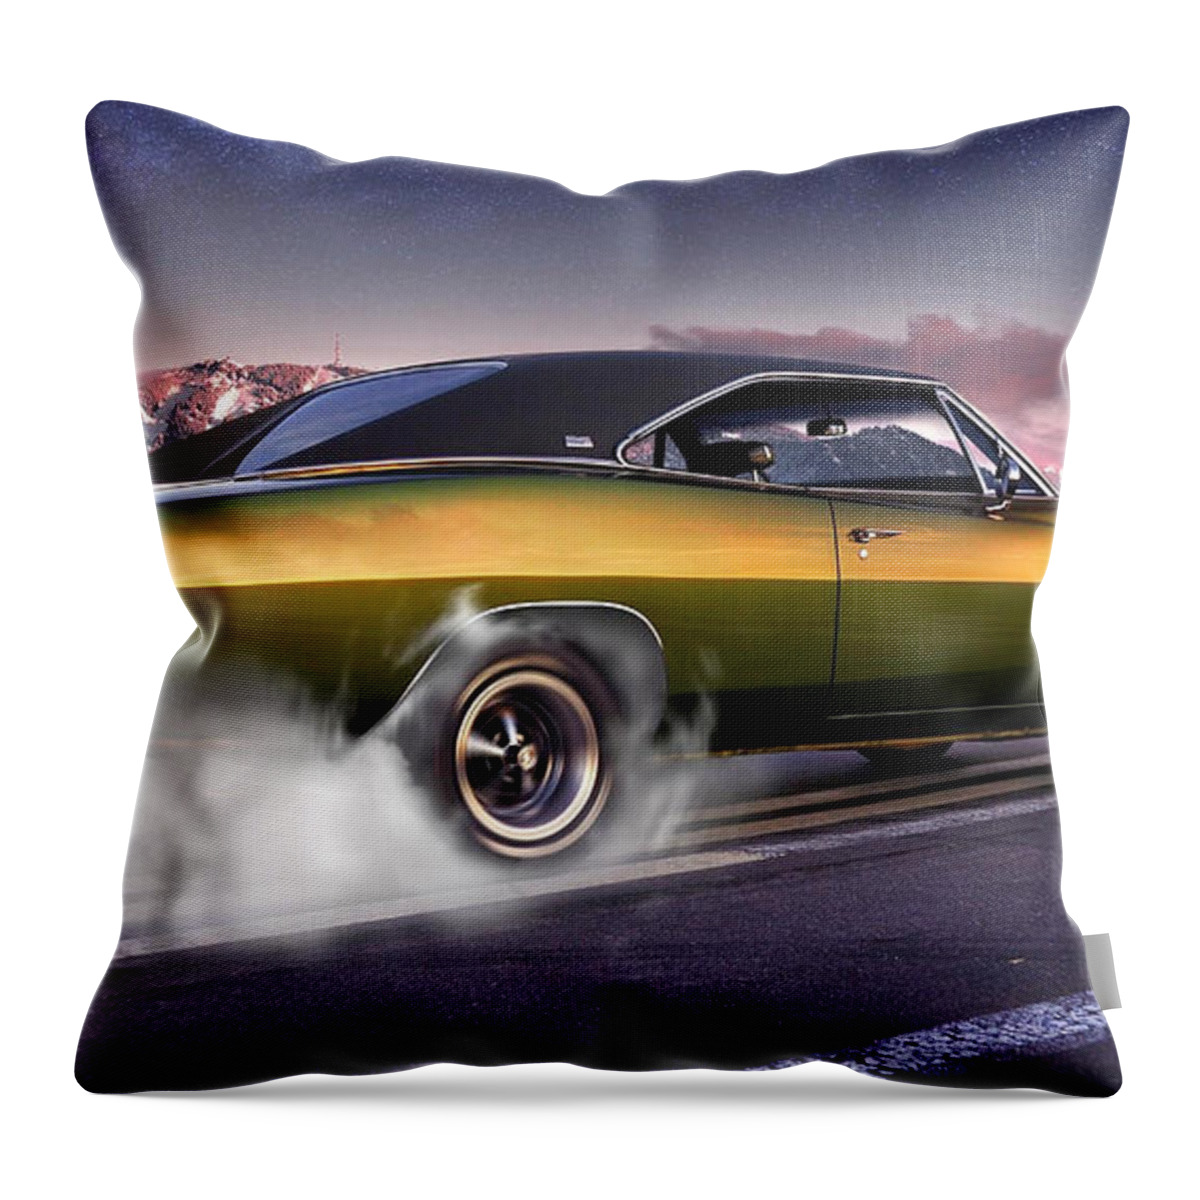 Dodge Throw Pillow featuring the photograph Dodge Charger by Action